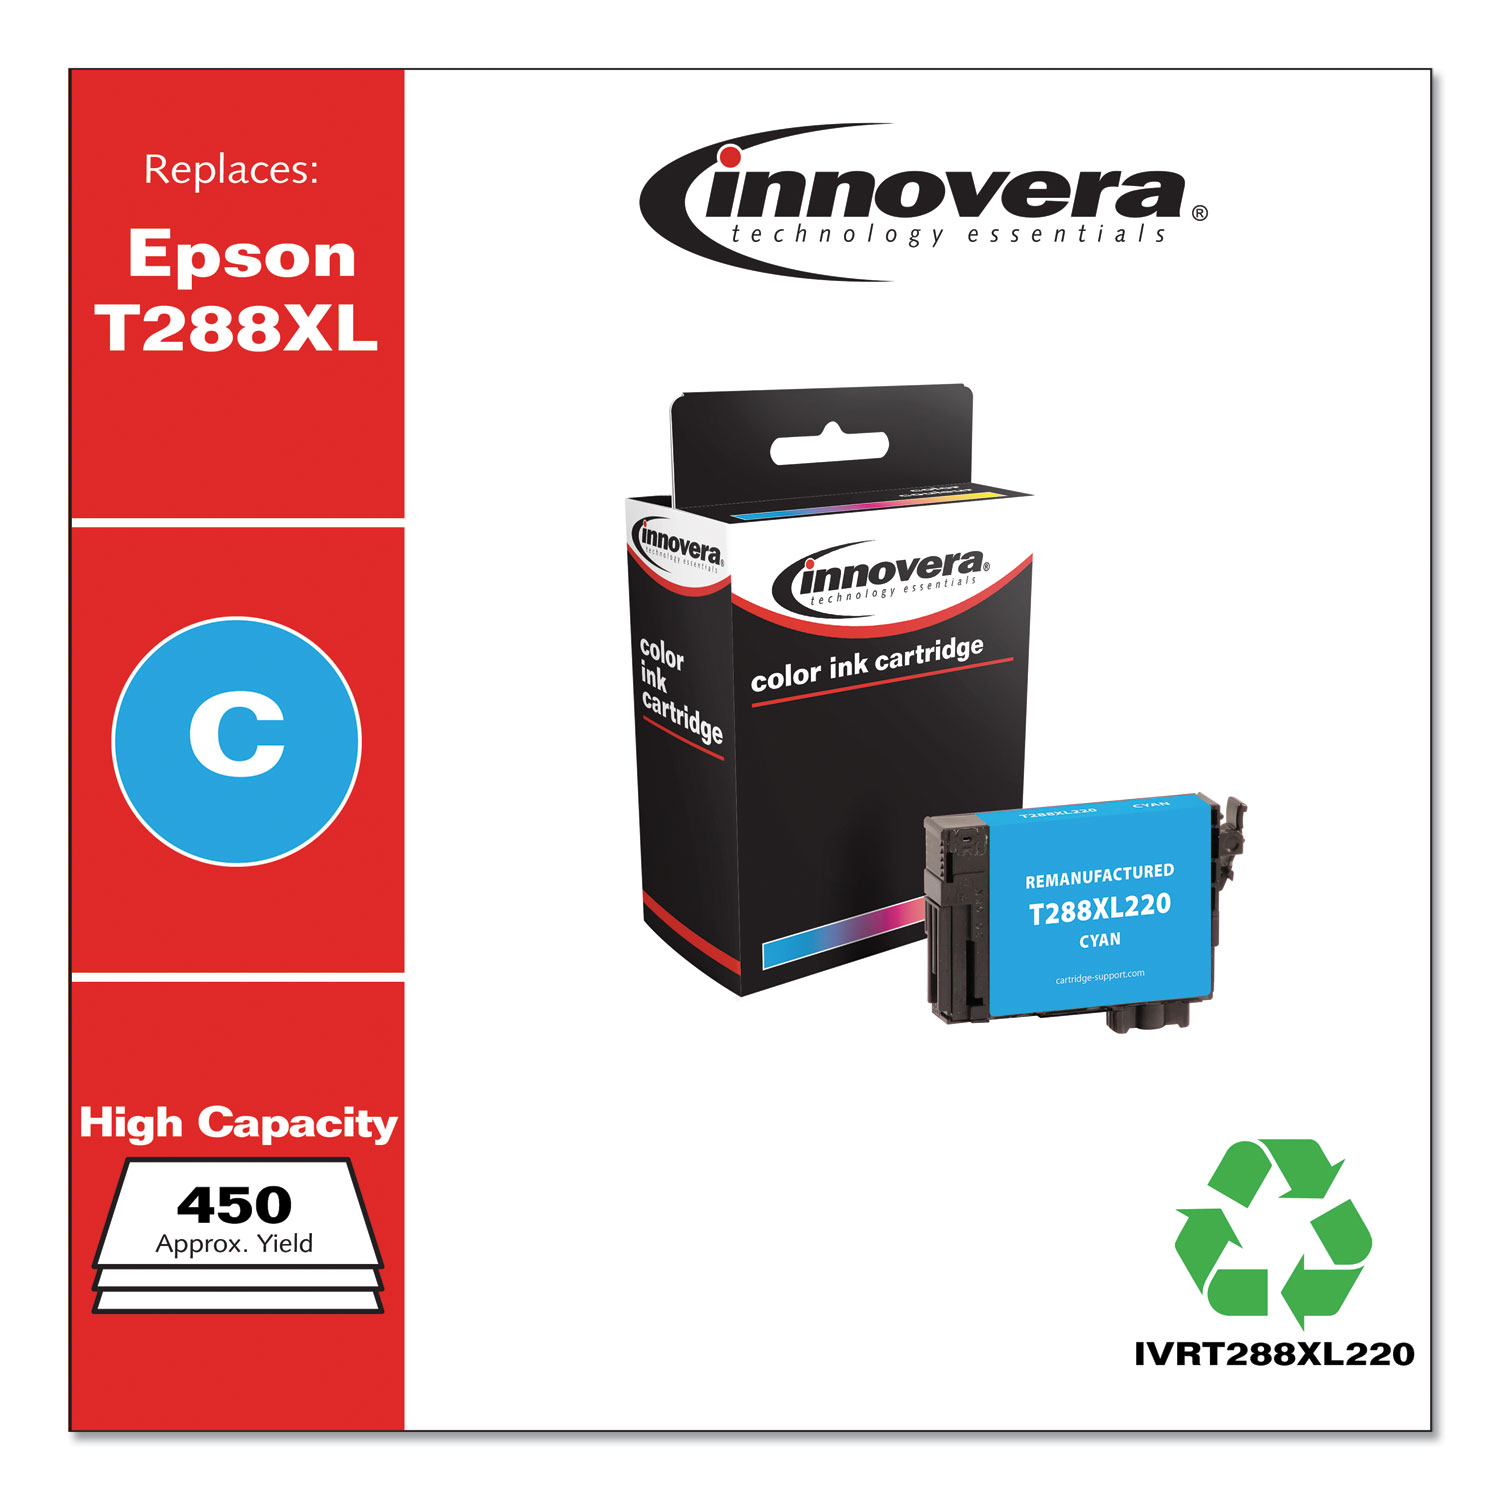  Innovera IVRT288XL220 Remanufactured Cyan High-Yield Ink, Replacement for Epson T288XL (T288XL220), 450 Page-Yield (IVRT288XL220) 